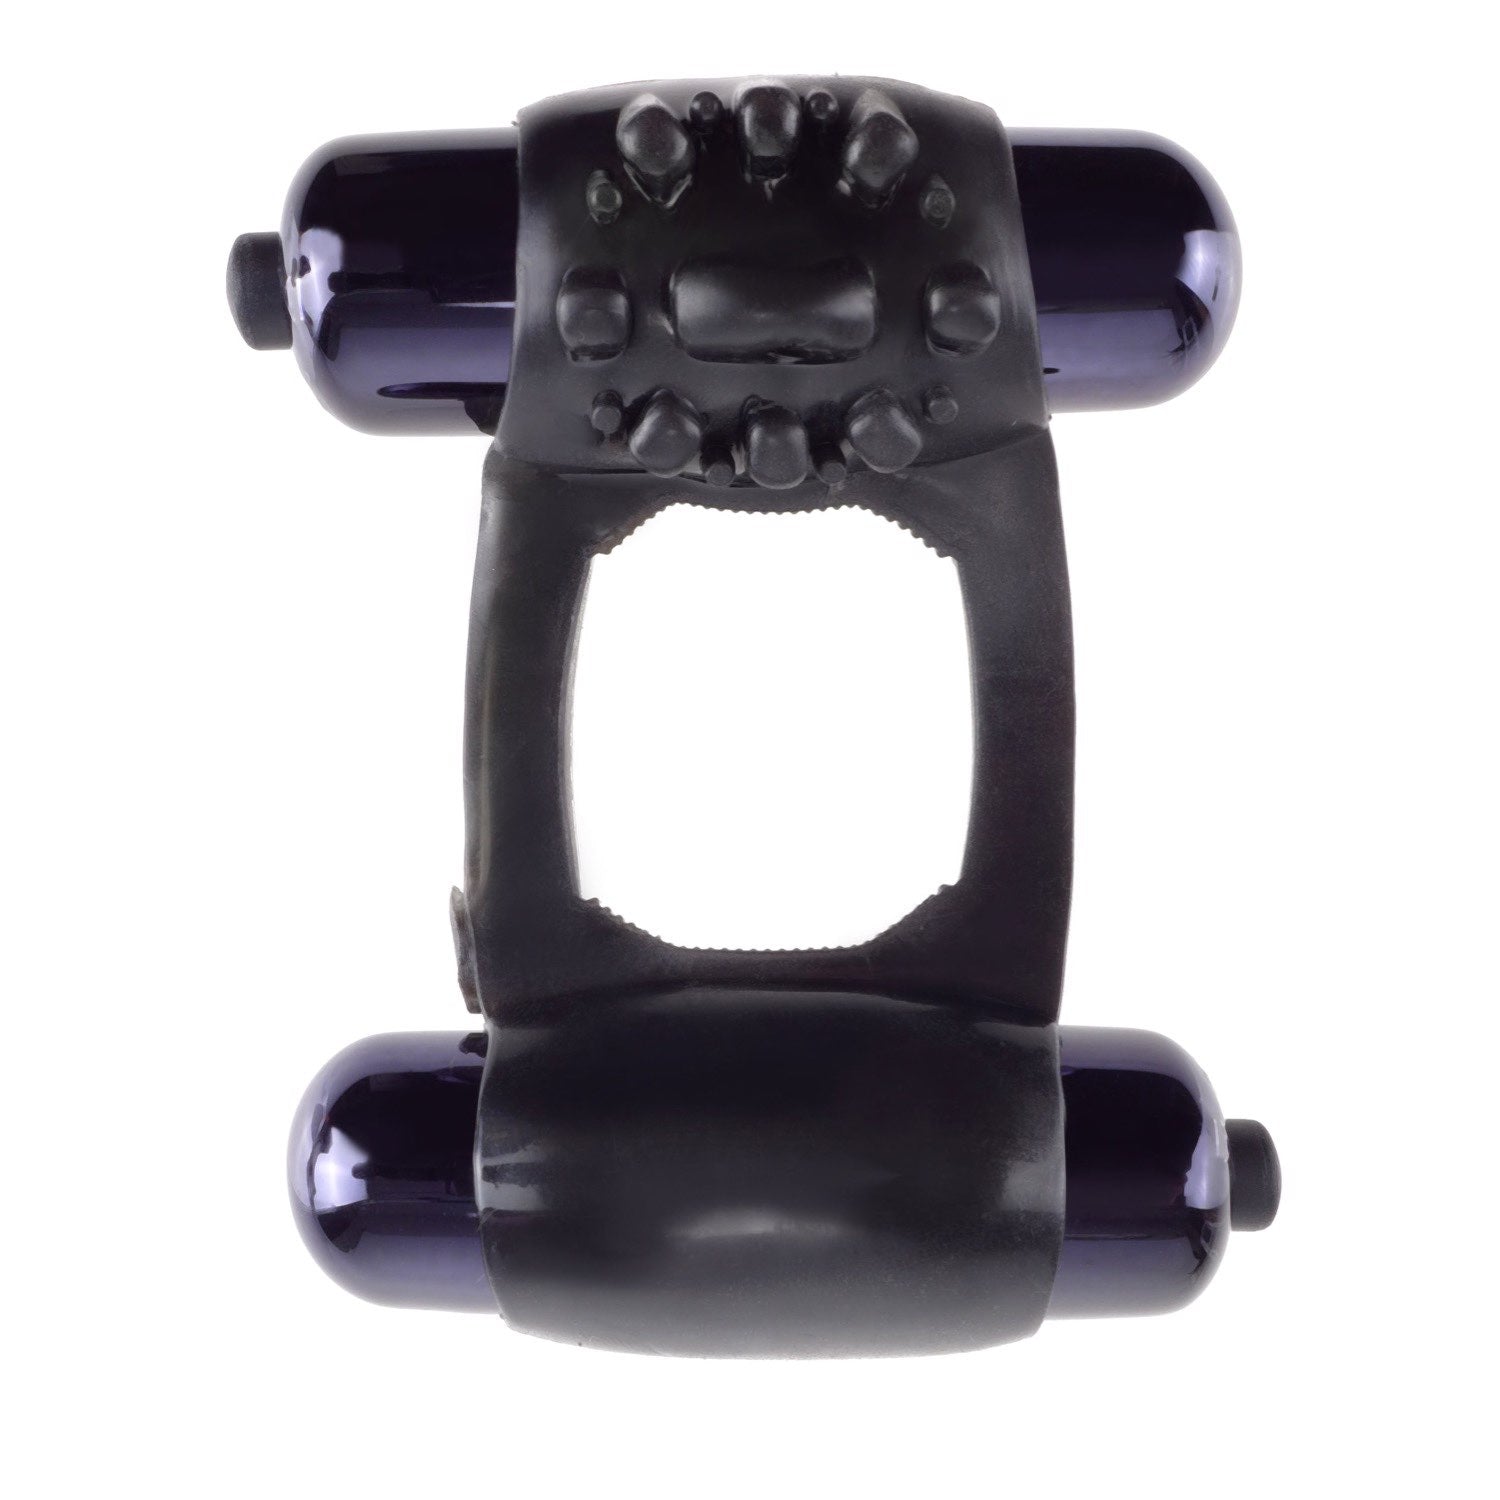 Fantasy C-Ringz Duo-Vibrating Super Ring - Black Dual Vibrating Cock Ring by Pipedream